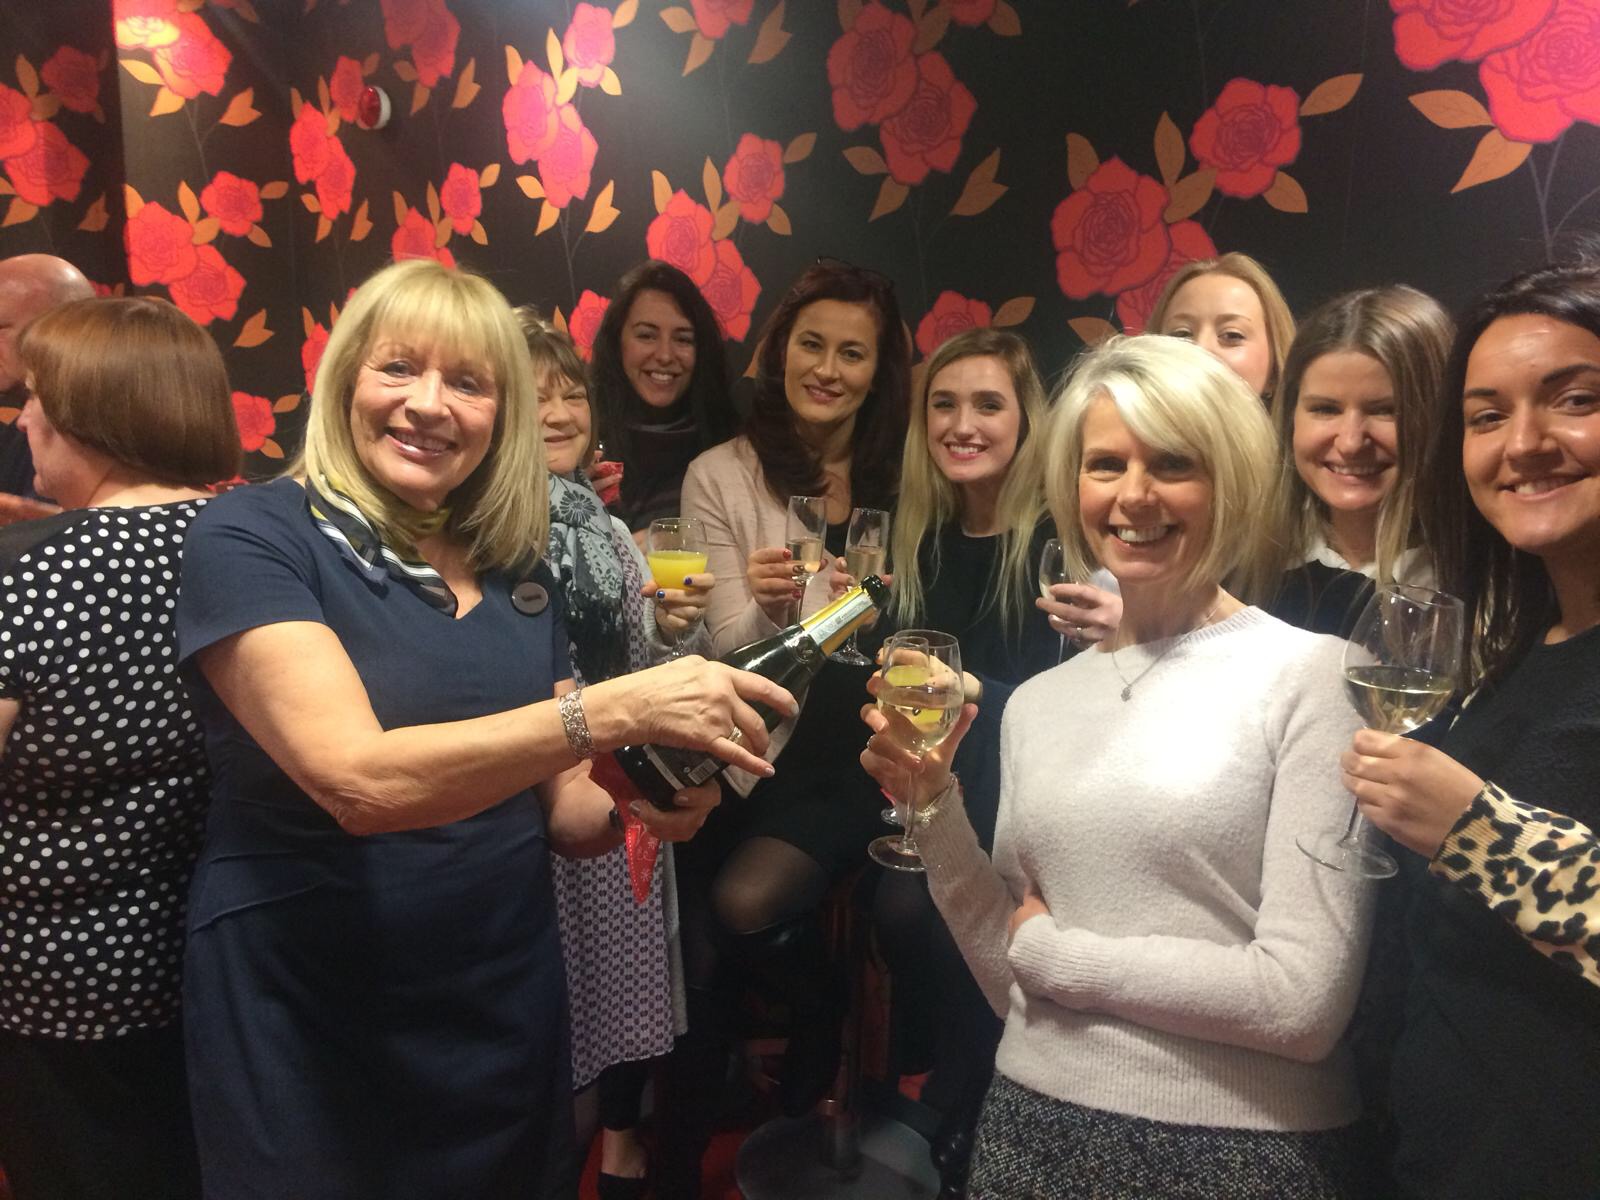 Christmas Prosecco at Rombourne's Merlin House offices